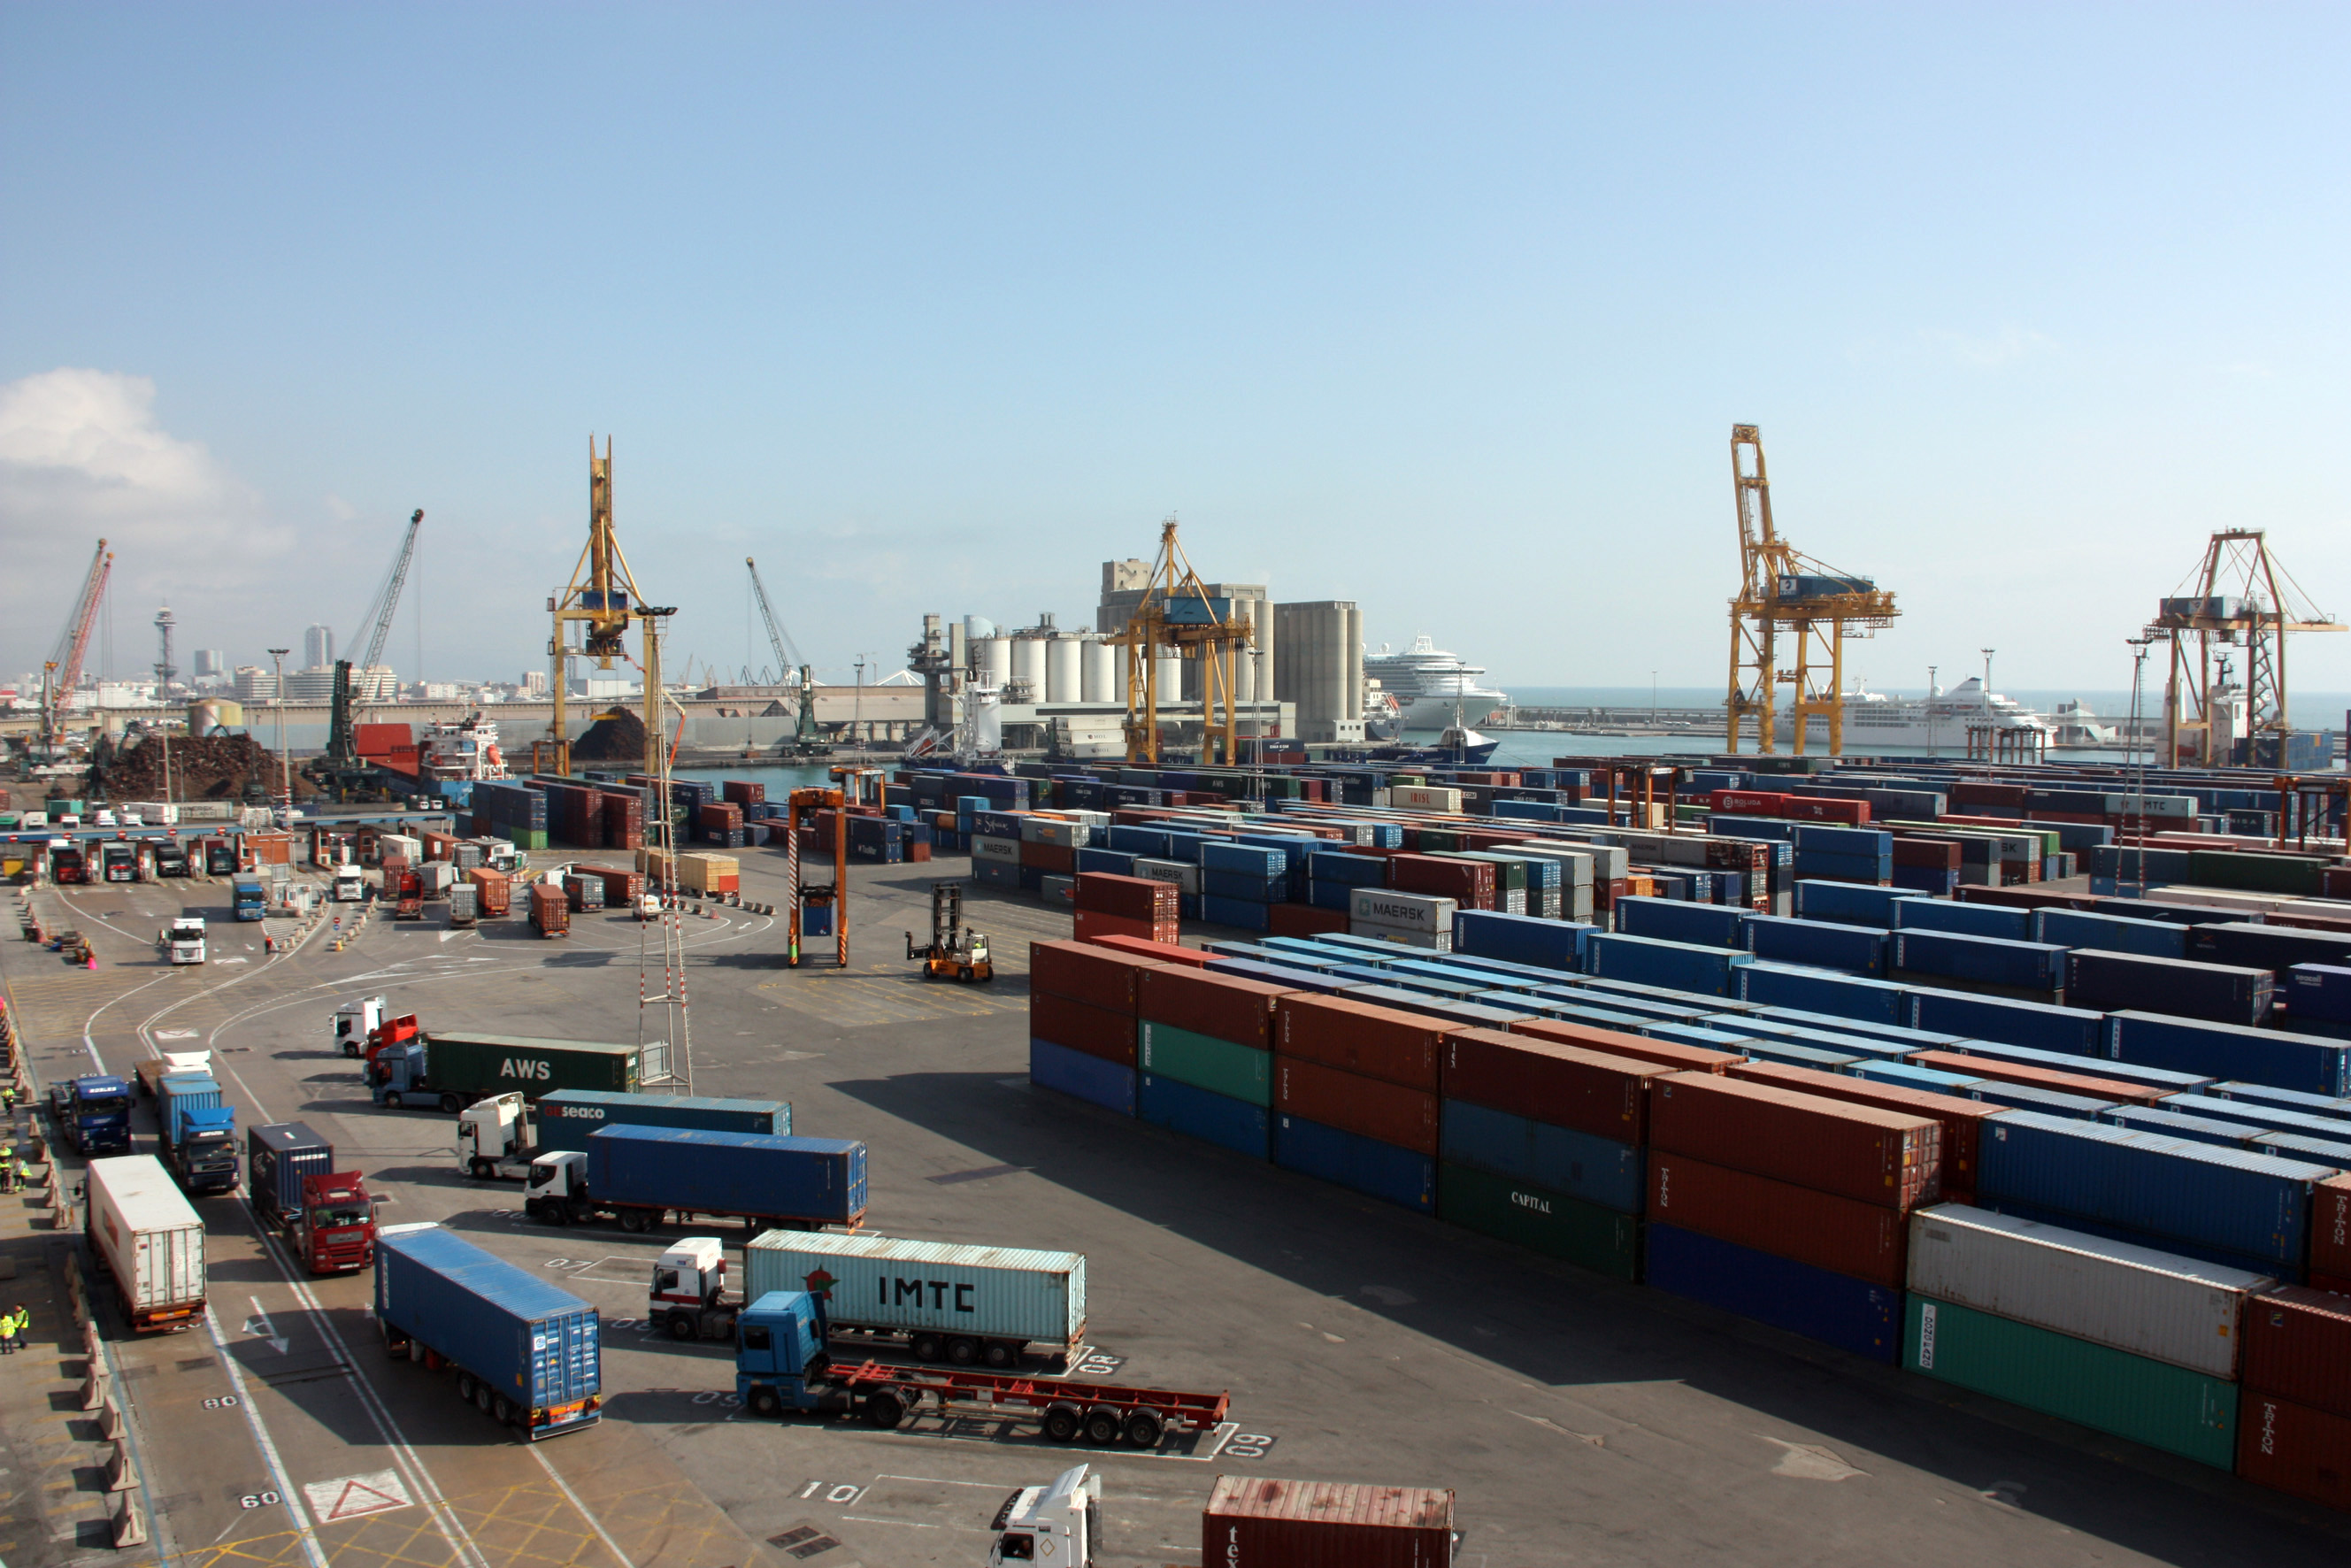 Containers in the Port of Barcelona (by ACN)